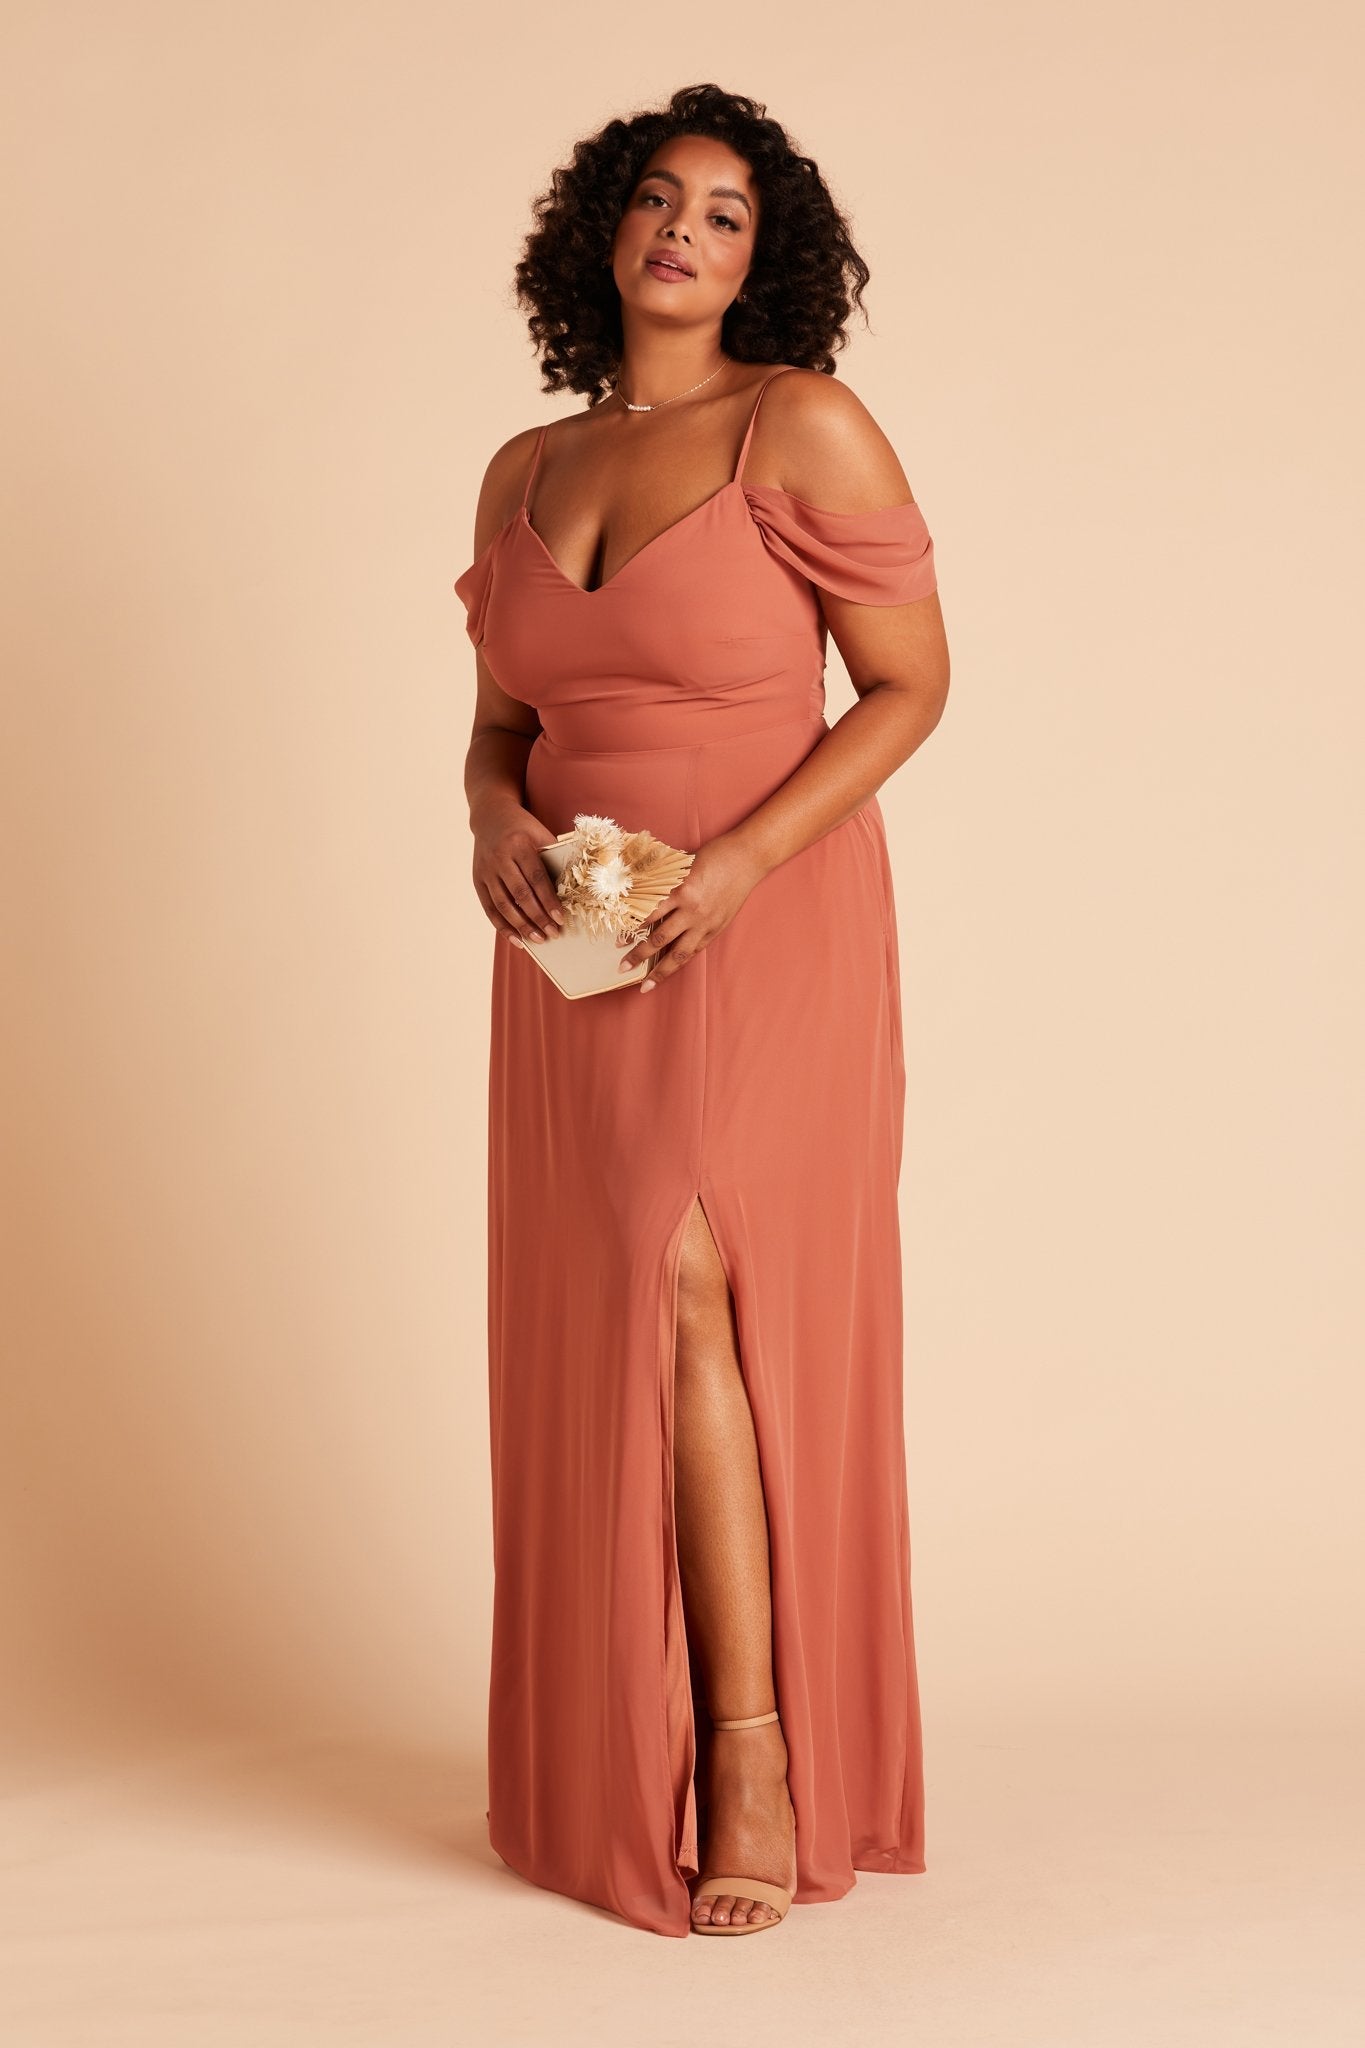 Front view of the floor-length Devin Convertible Plus Size Bridesmaid Dress in terracotta chiffon worn by a curvy model with a medium skin tone. The dress’s detachable sleeves drape gracefully over the model’s upper arms.